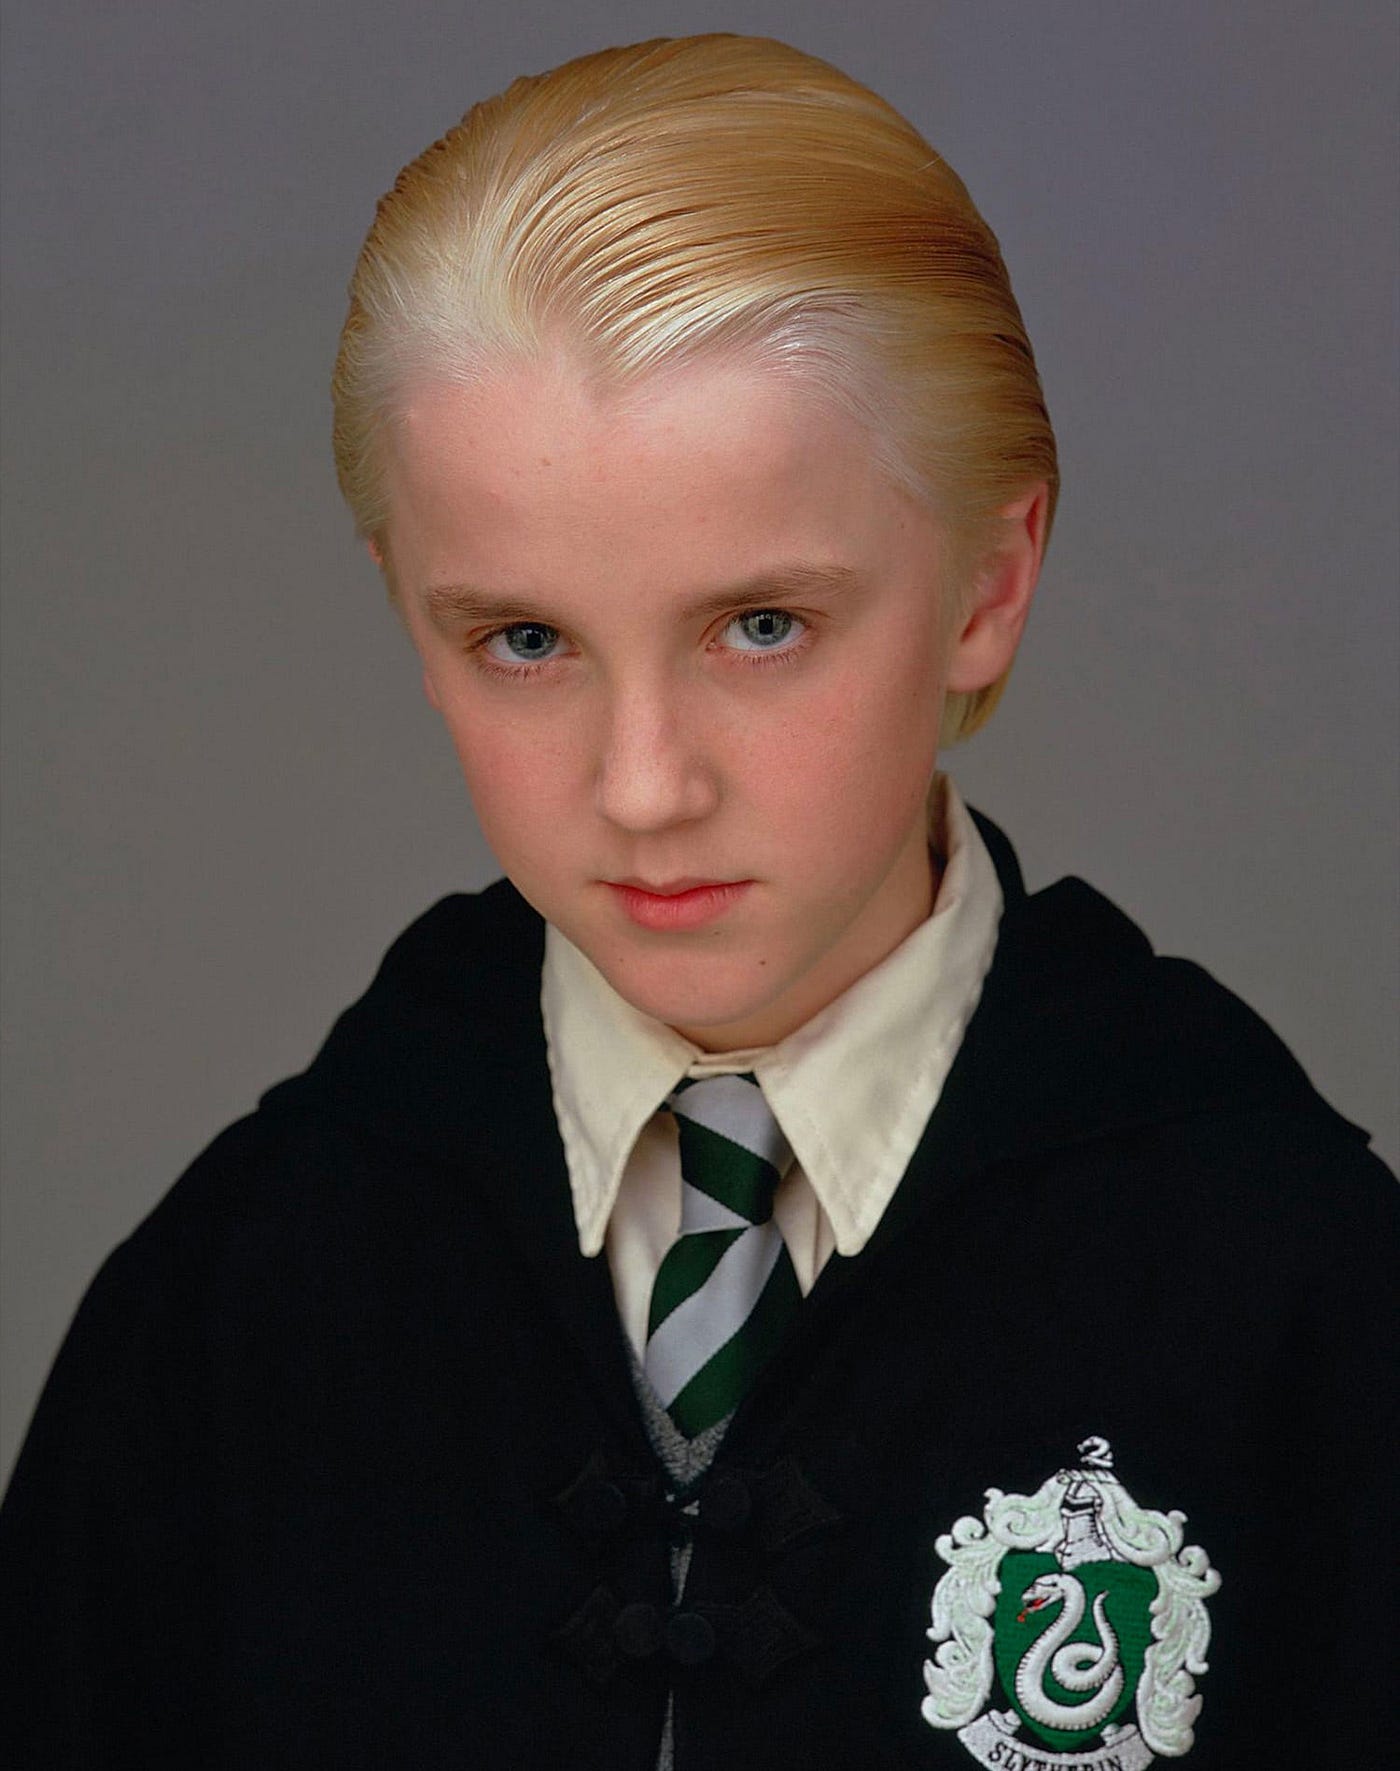 Draco Malfoy: The Complex Journey of a Troubled Soul, by Happyyipo